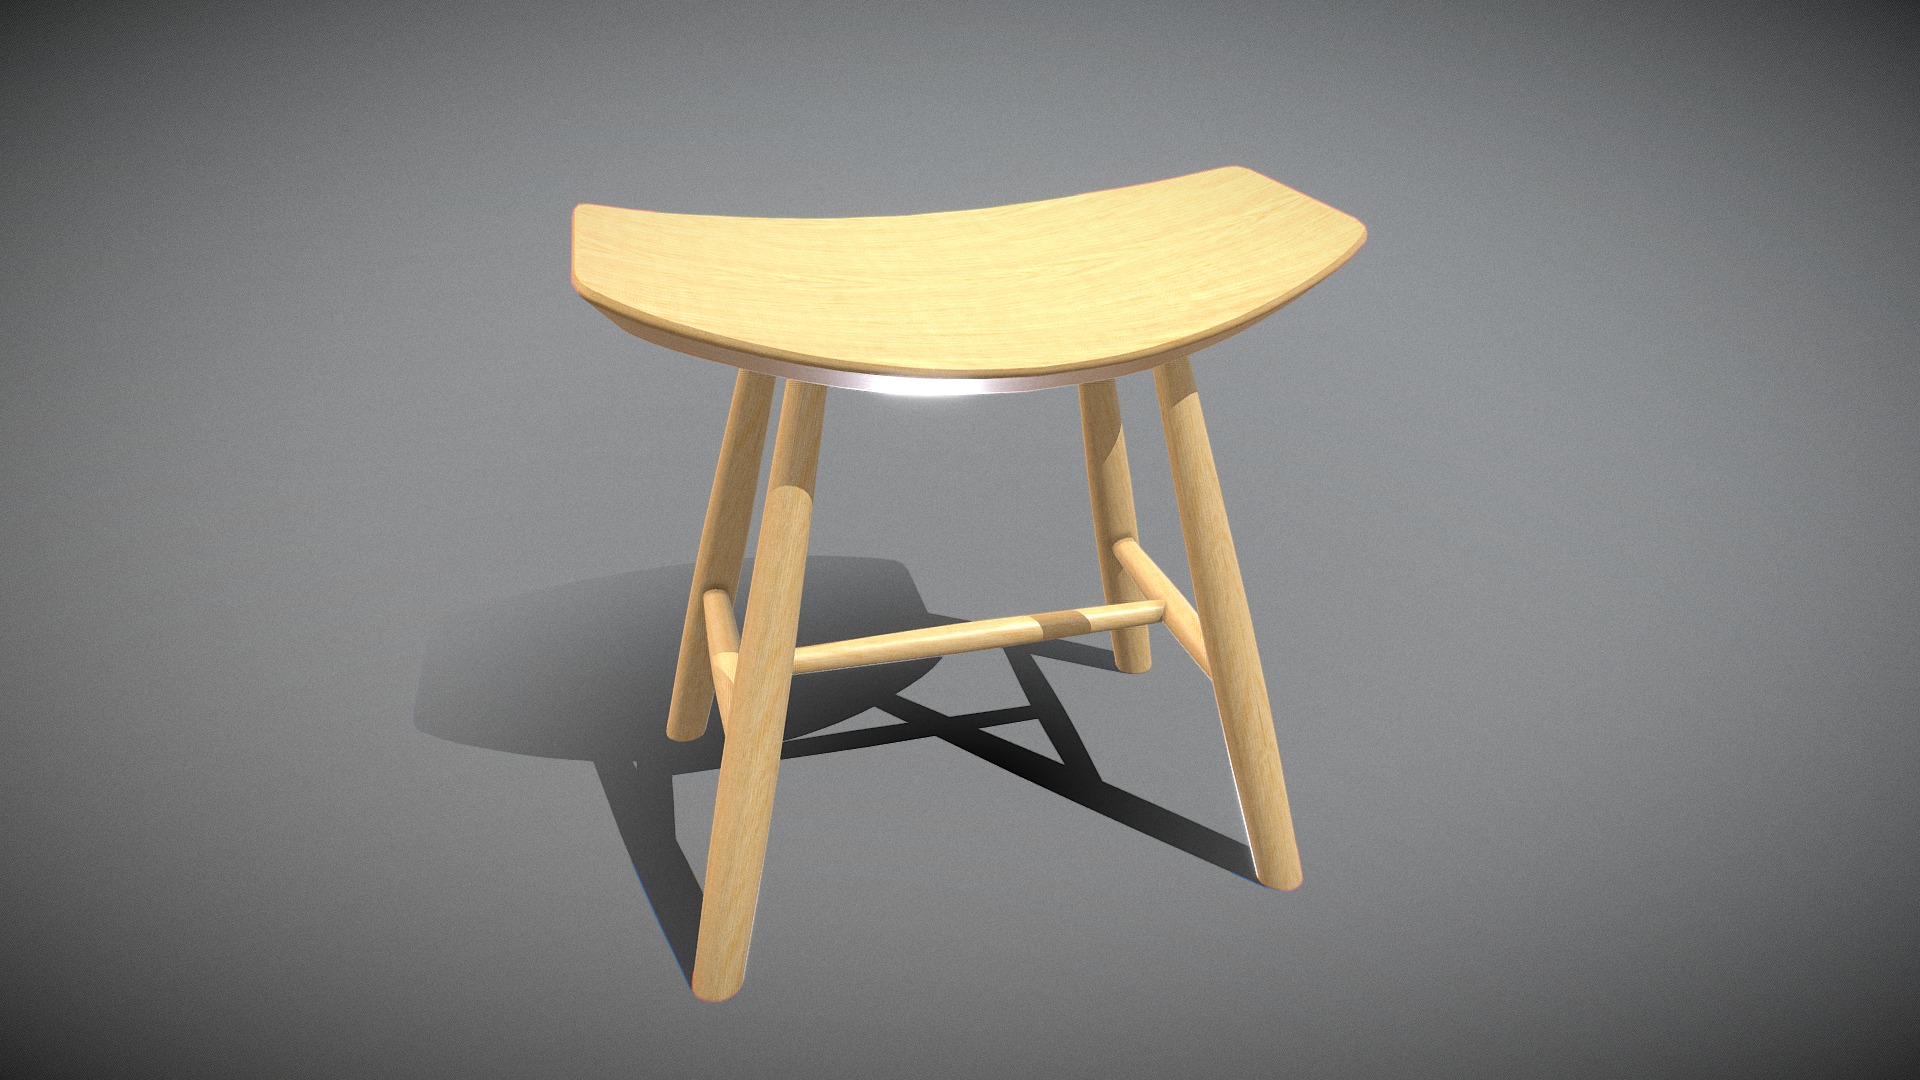 3D model Johansson J63 Stool WoodVaneer - This is a 3D model of the Johansson J63 Stool WoodVaneer. The 3D model is about a wooden chair on a white background.